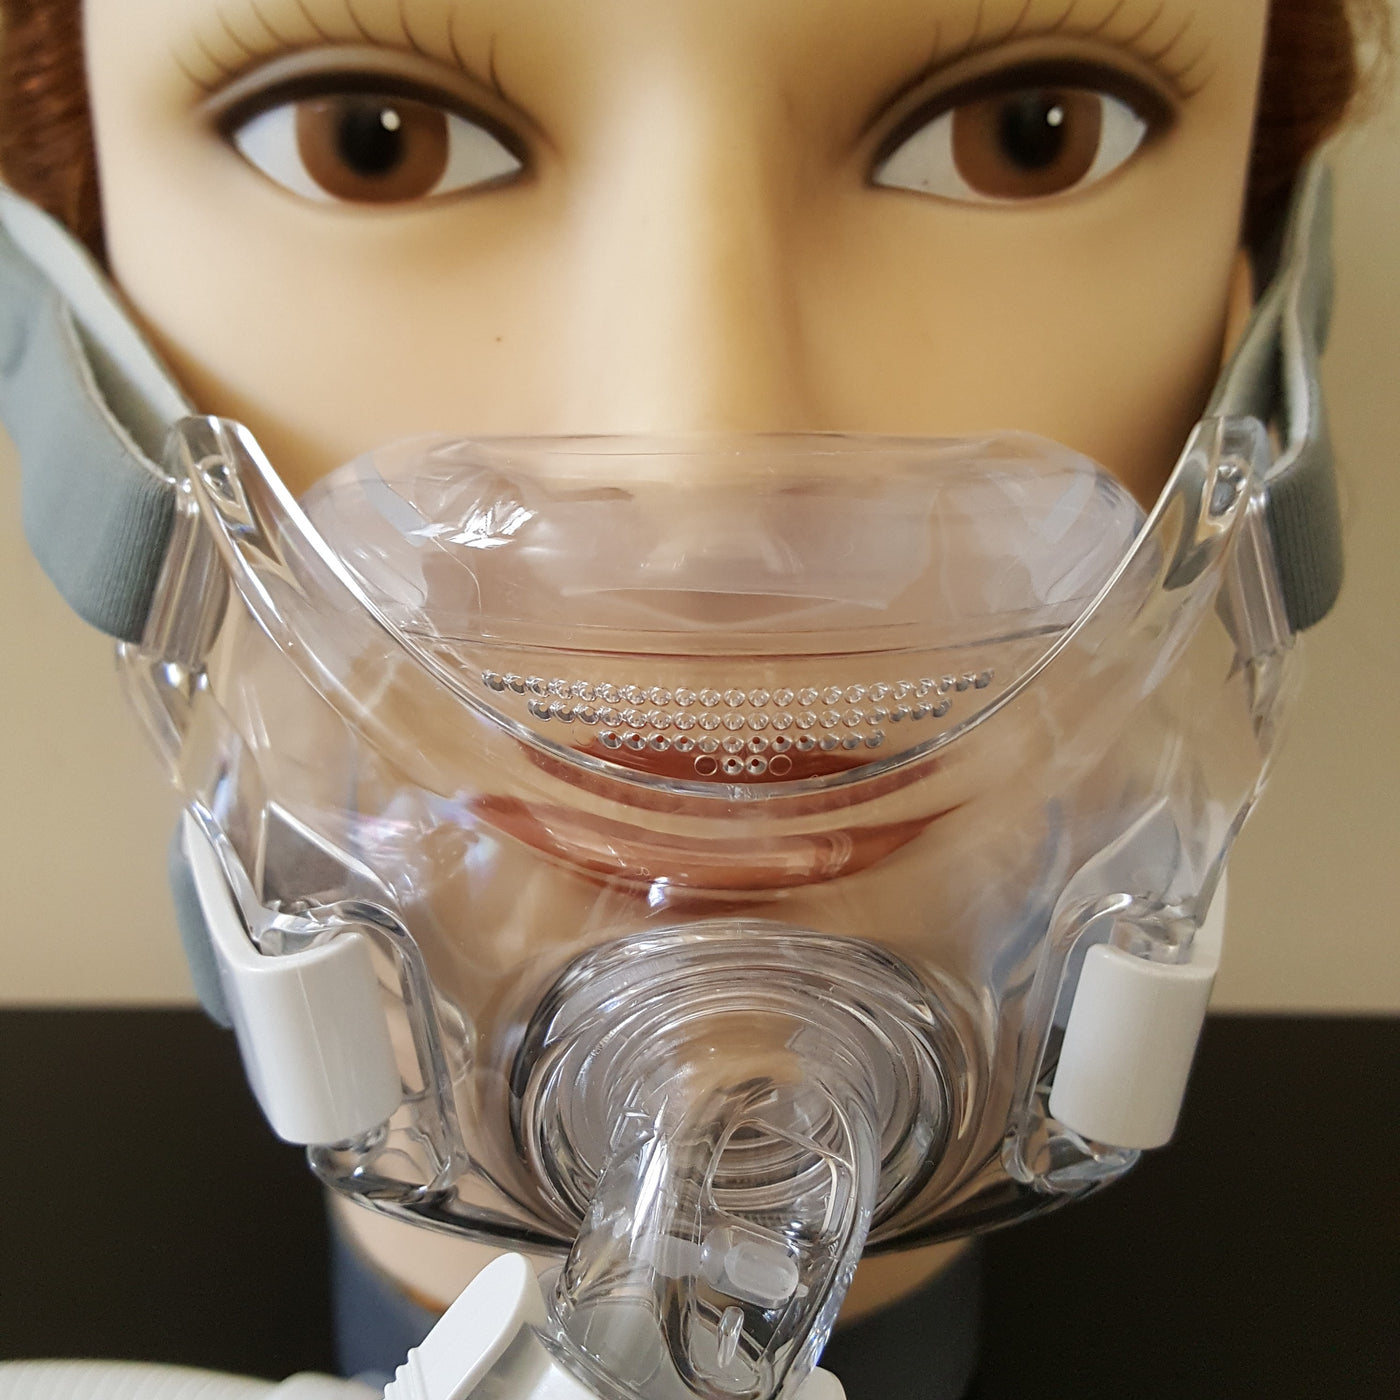 Philips Respironics AmaraView Full Face CPAP mask with headgear, all sizes